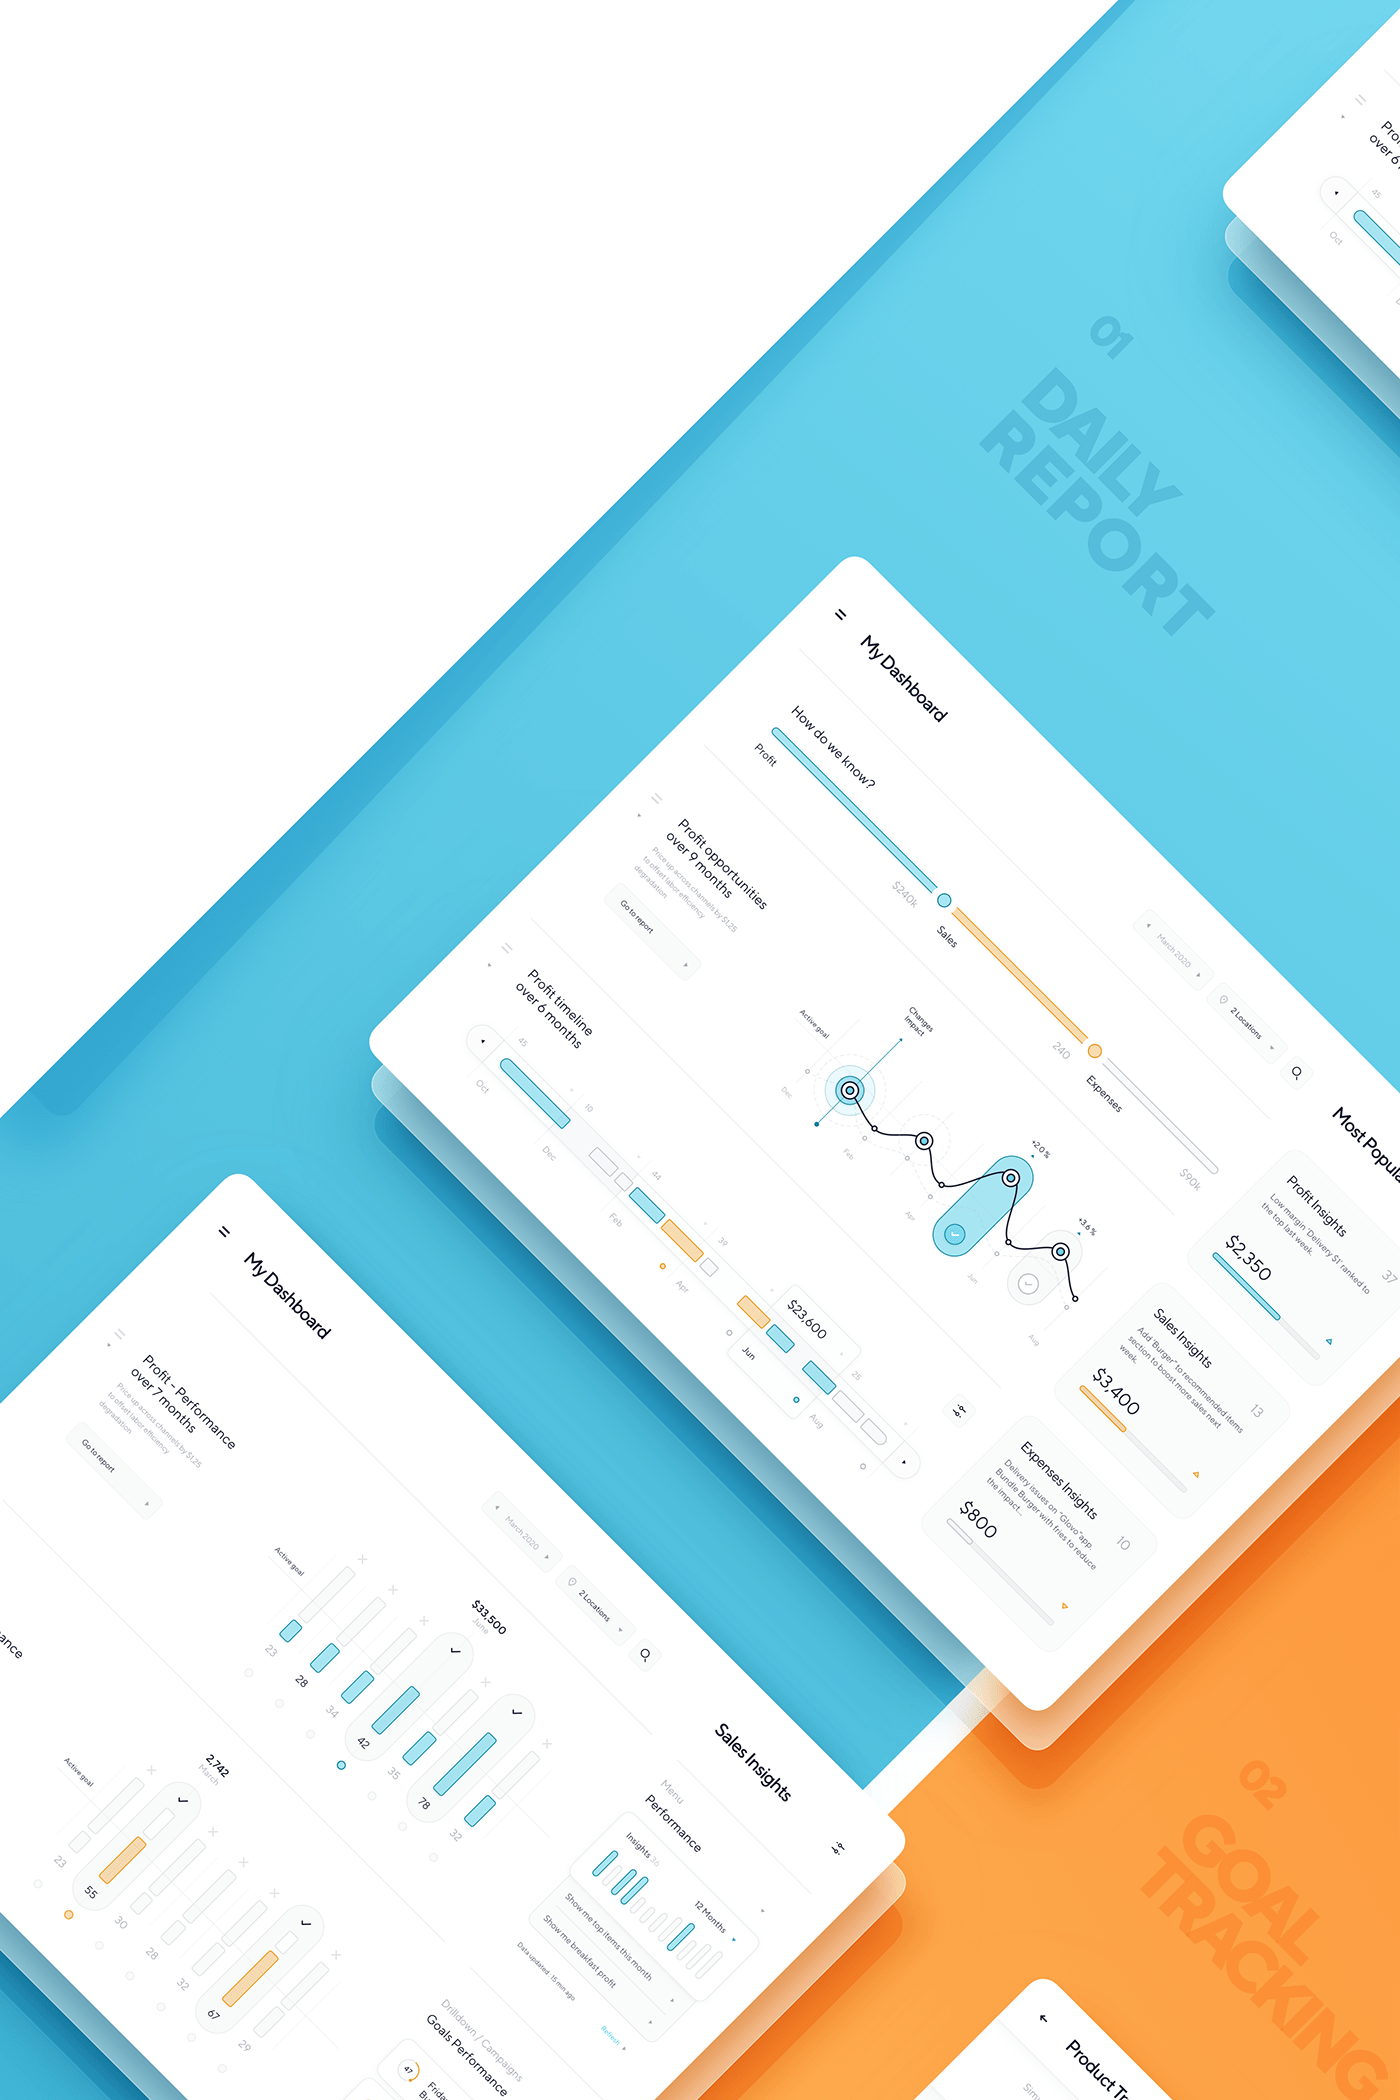 Dashboard design, product tracking and simulation results. 